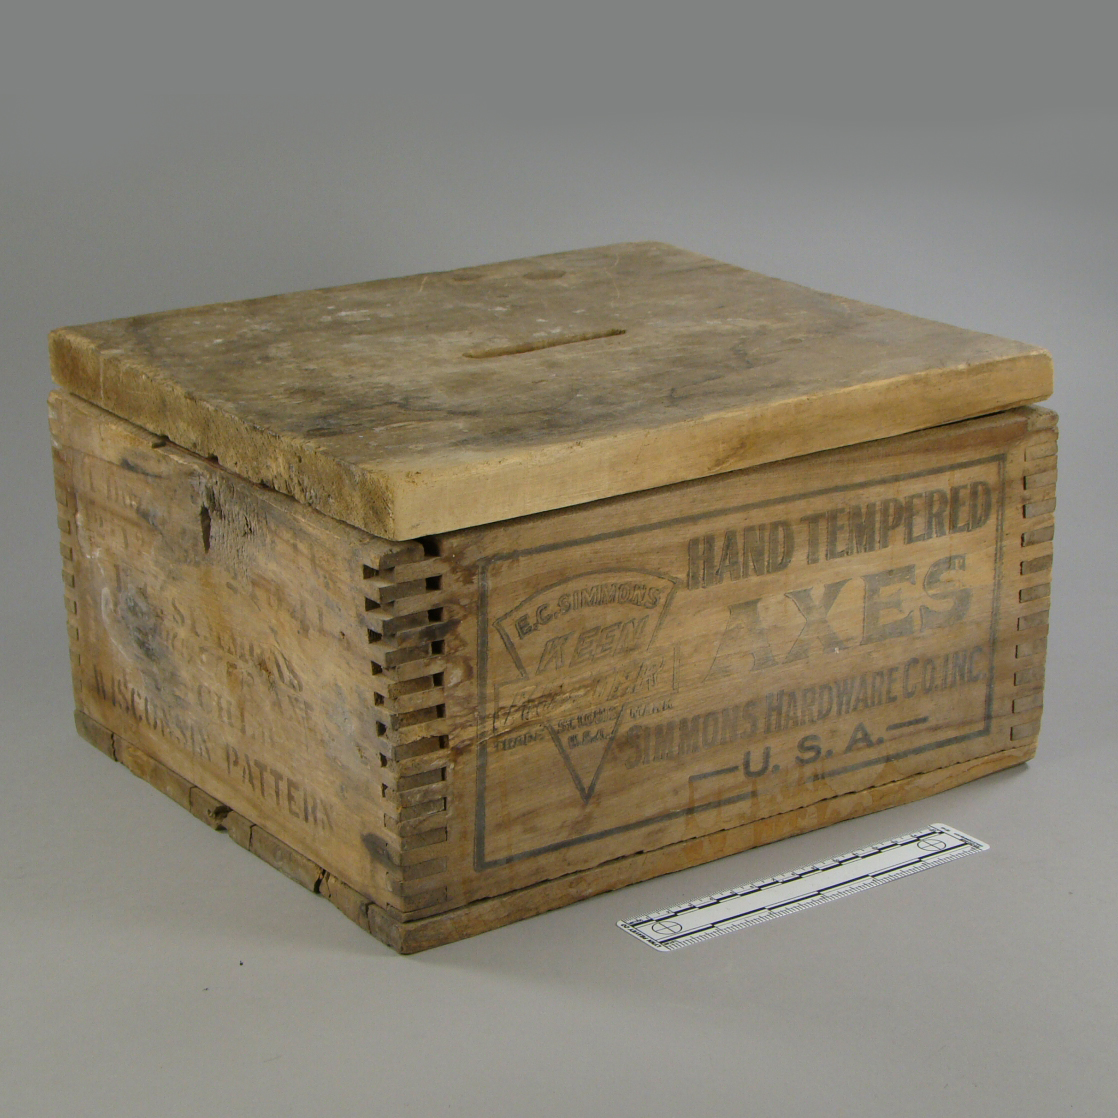 Ballot Box used in Town of Weston, Clark County, Wisconsin, ca. 1915.